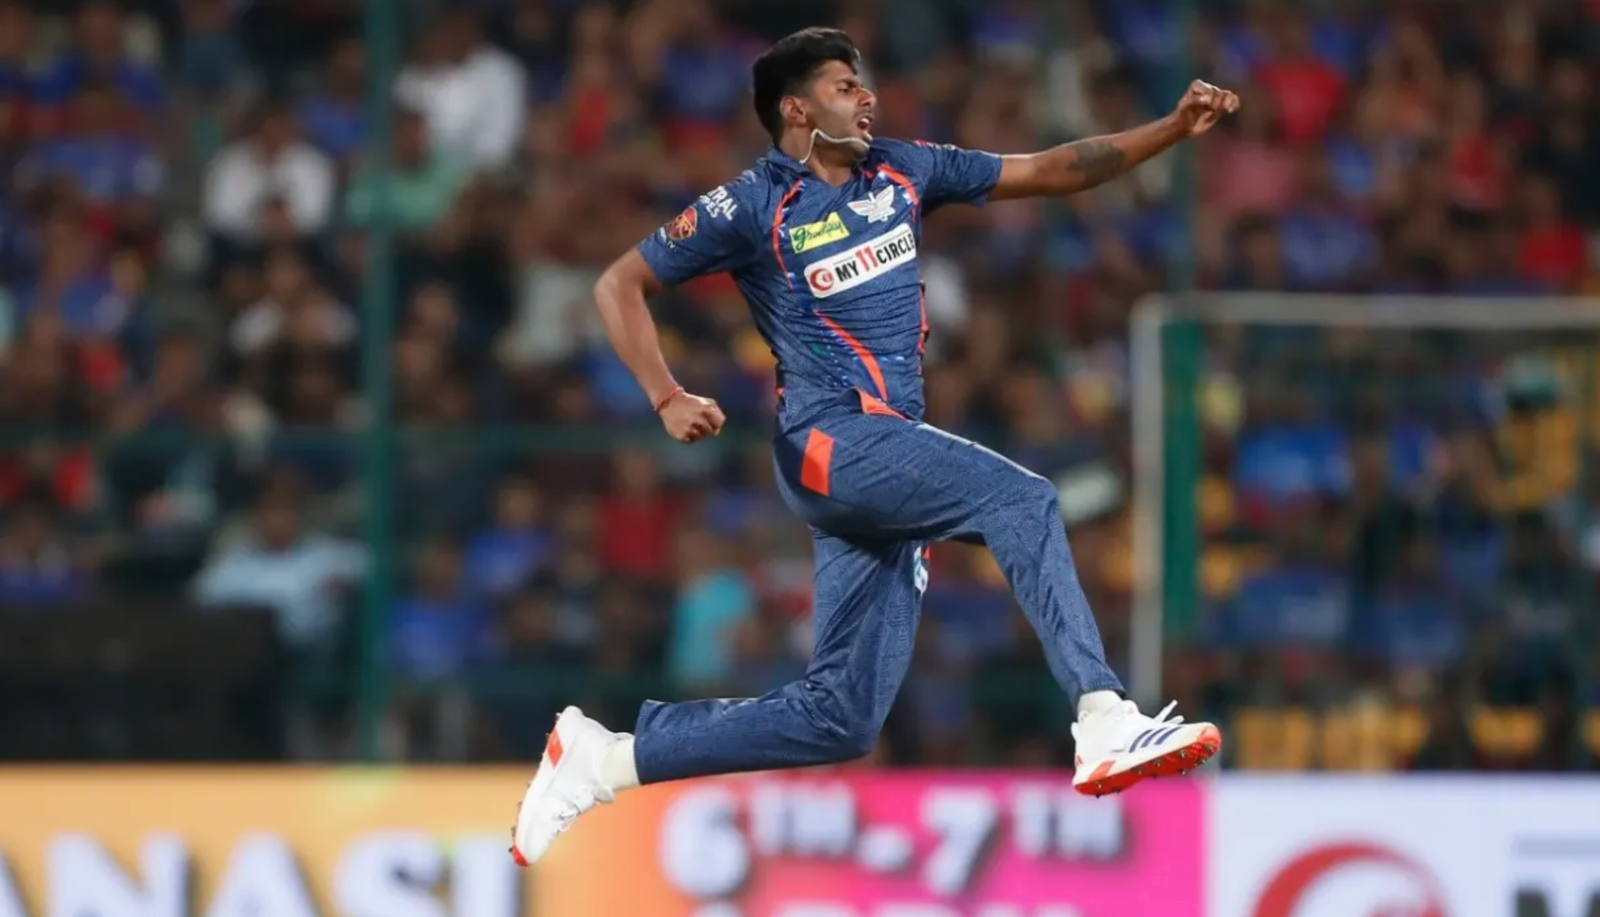 Mayank Yadav bowled a 156.7 kph delivery in his match-winning spell of 3 for 14 in four overs at the Chinnaswamy Stadium